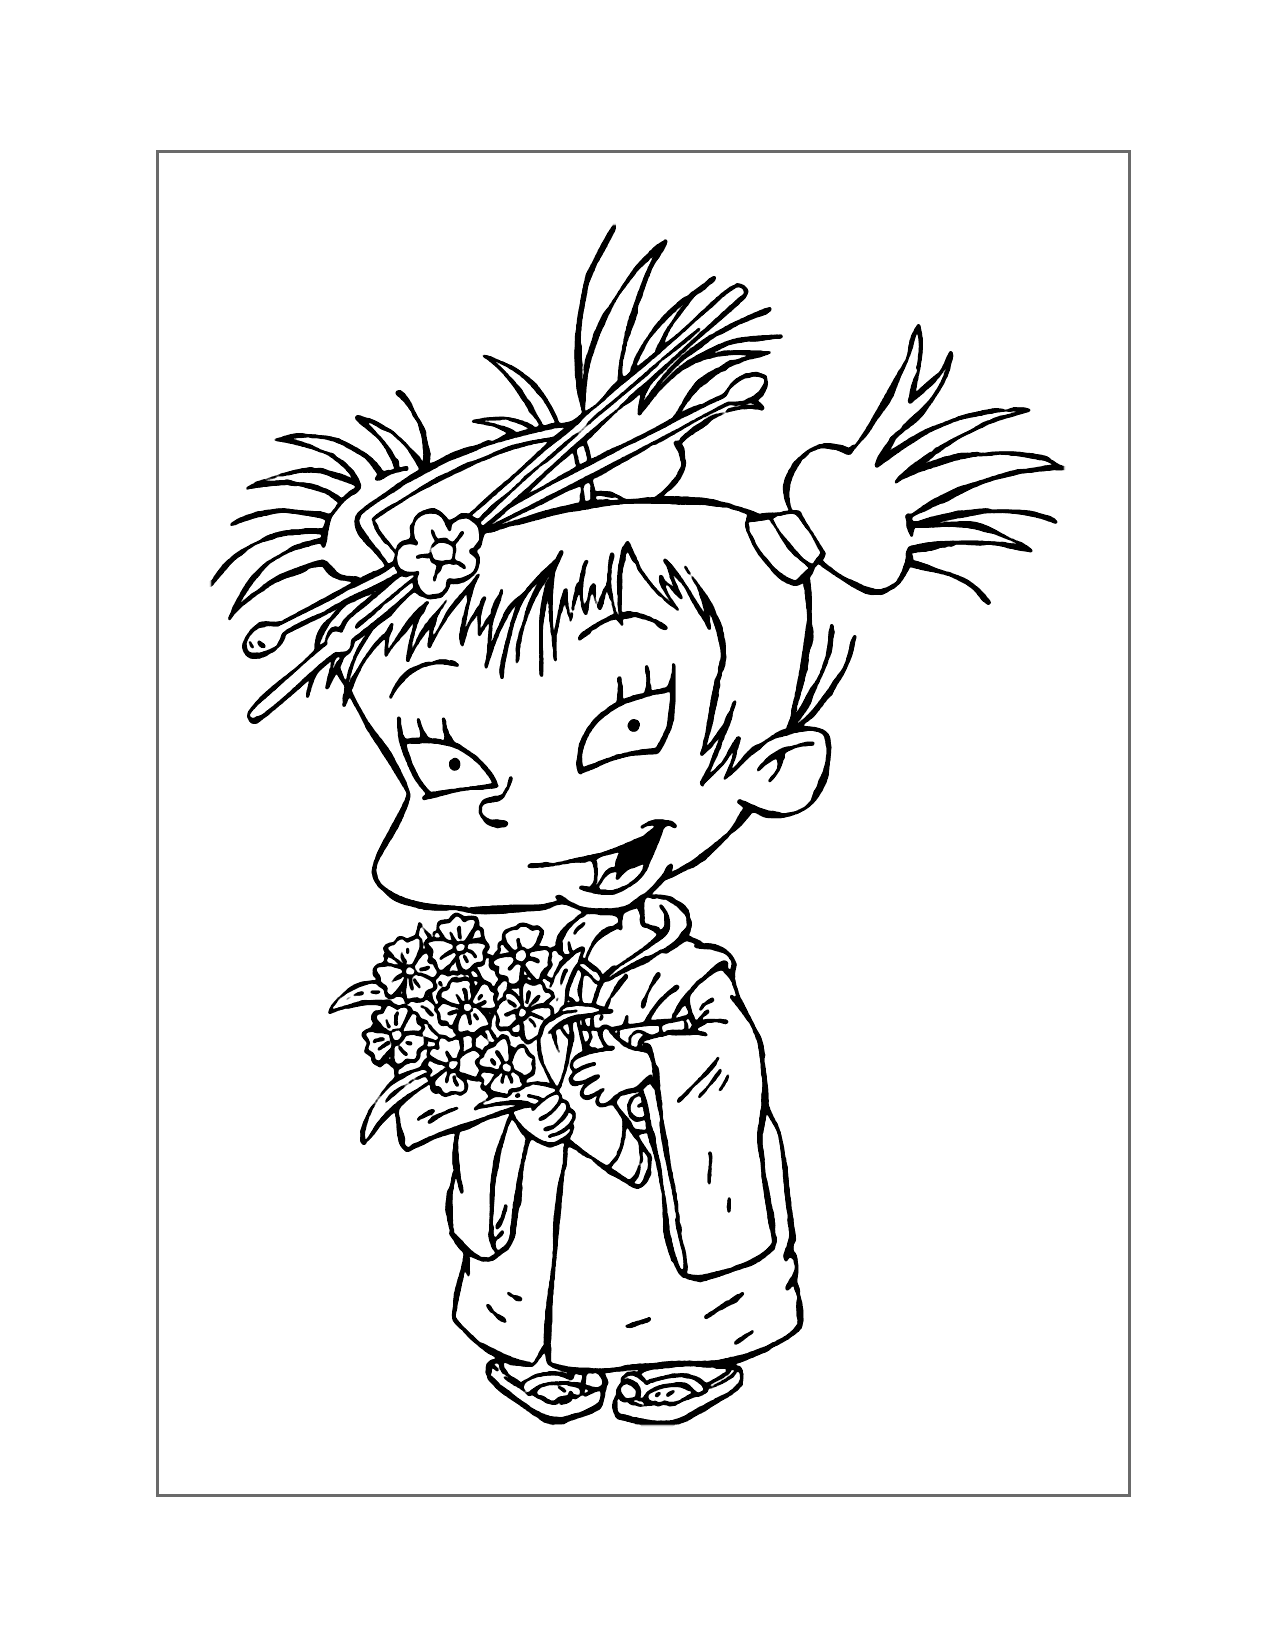 Kimi Finster Rugrats Coloring Page